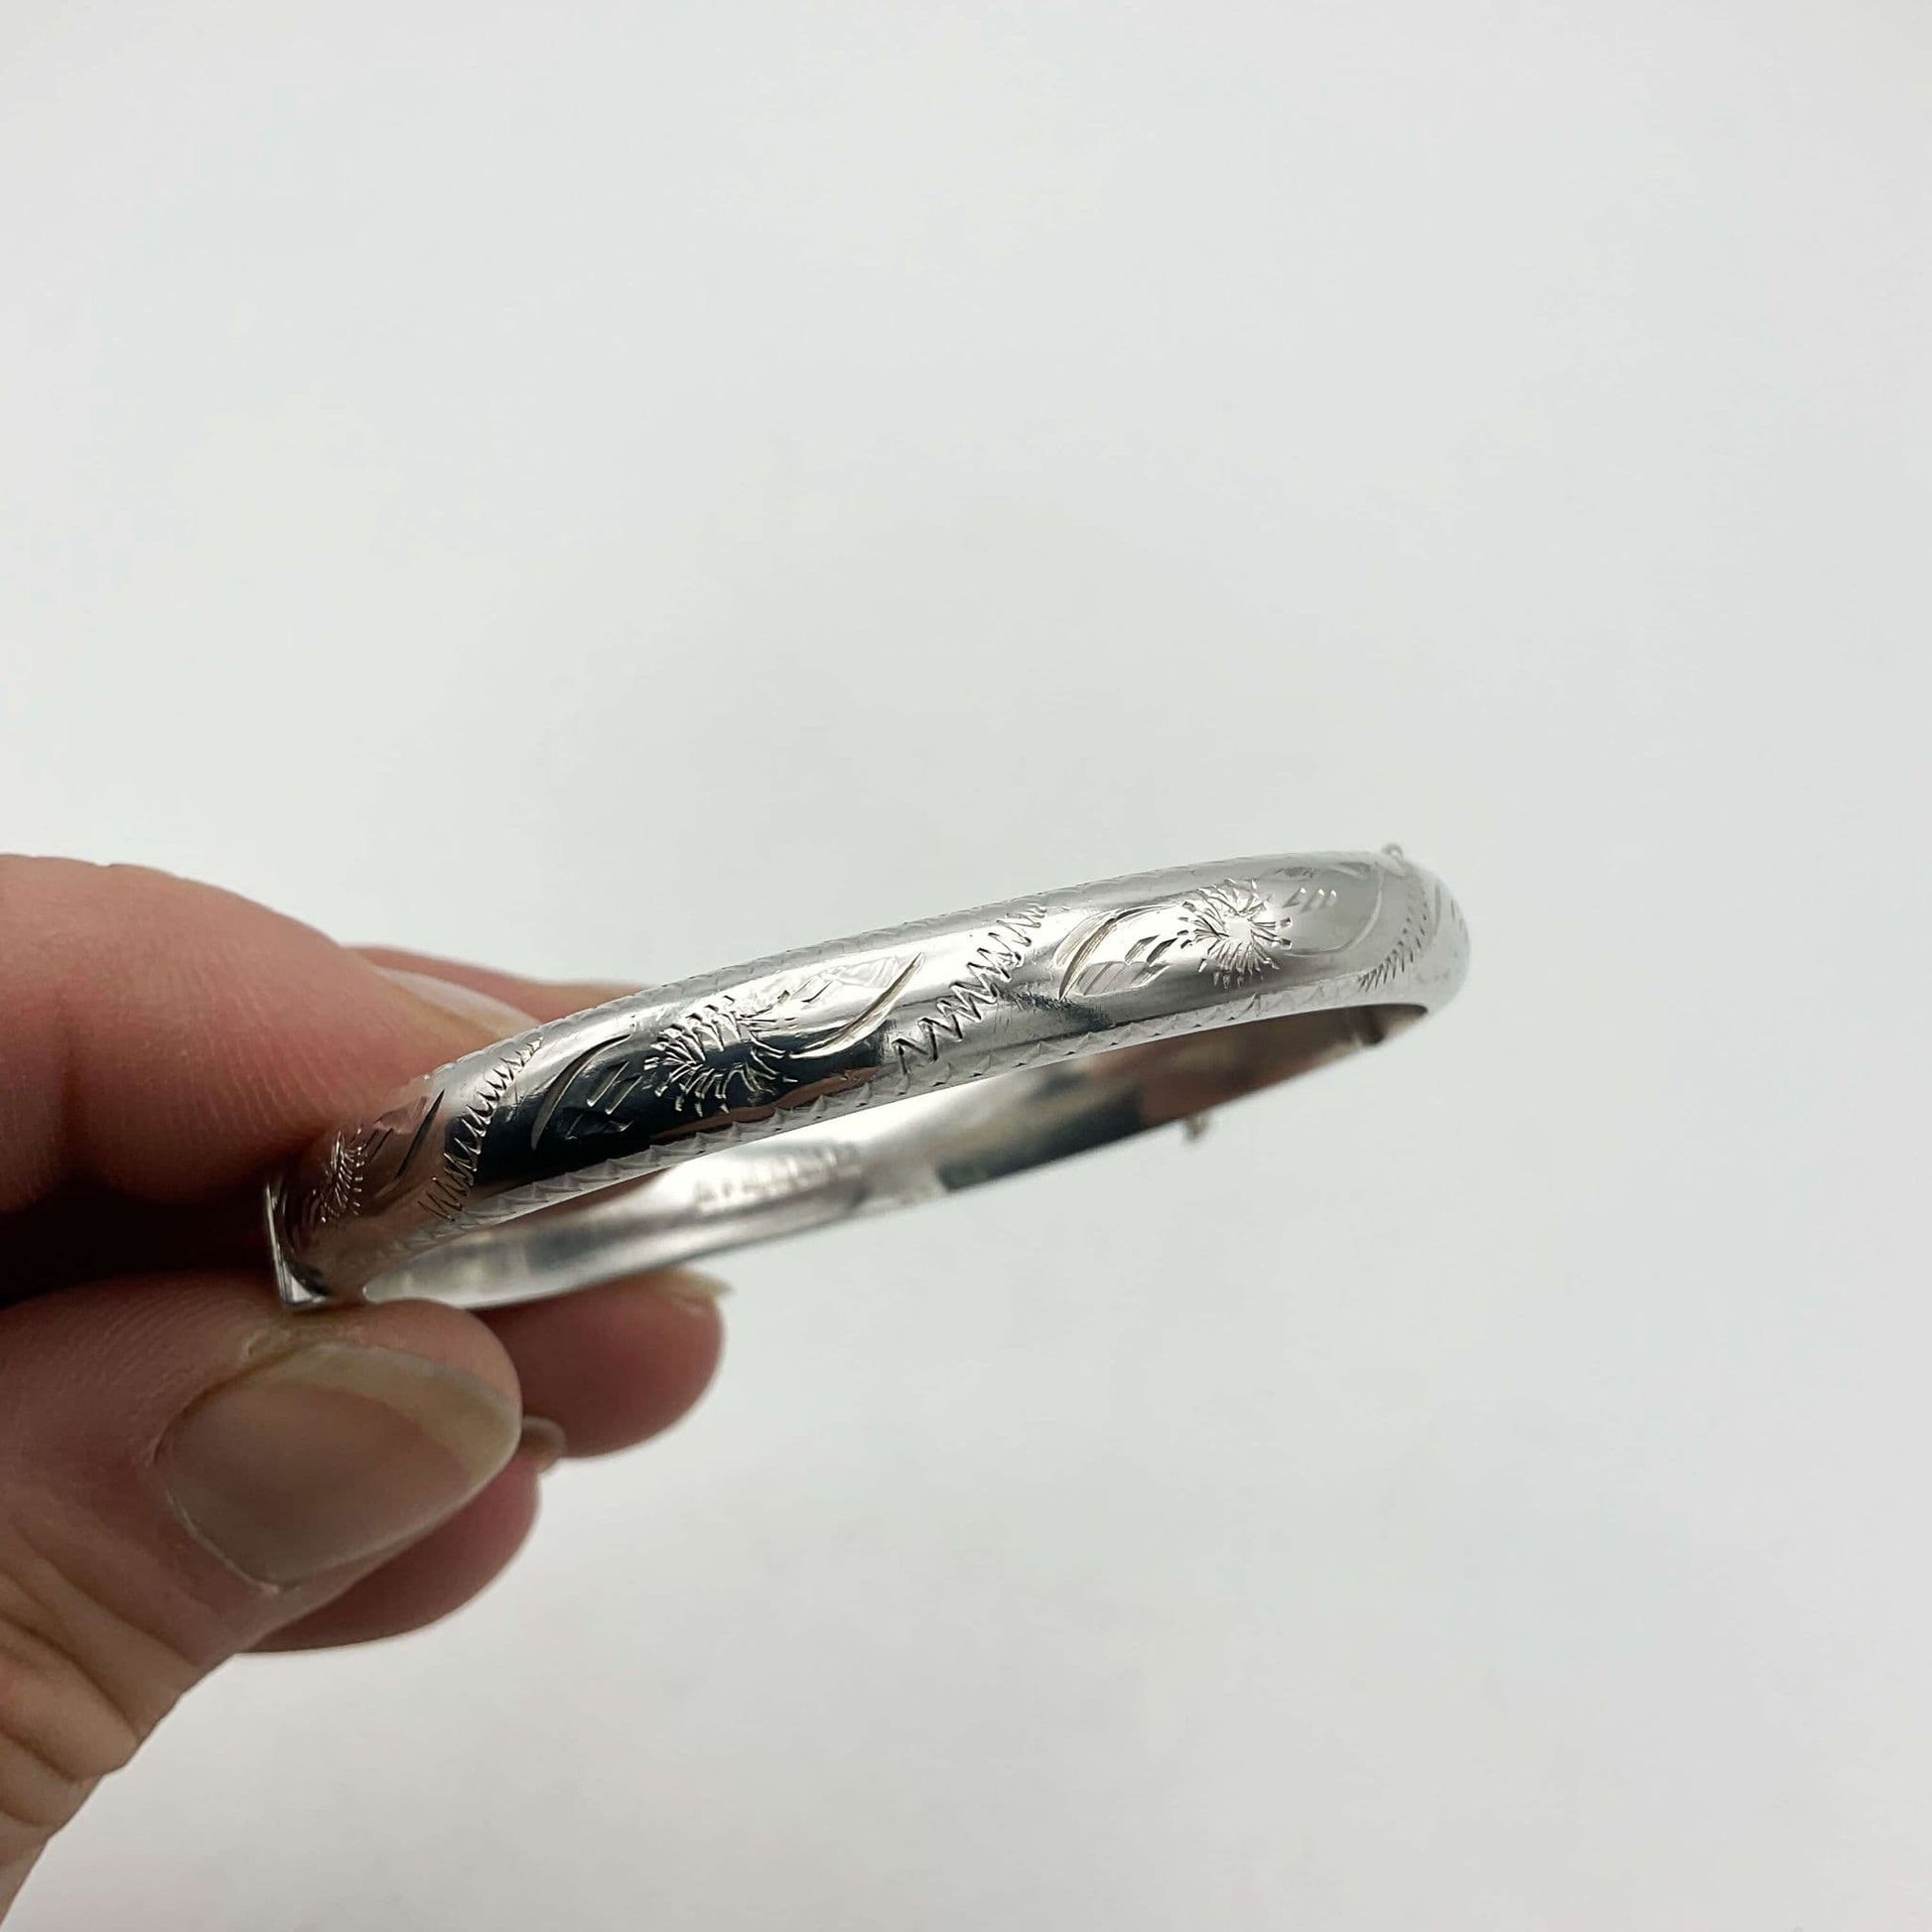 Side view of silver bracelet showing an engraved design held in a hand